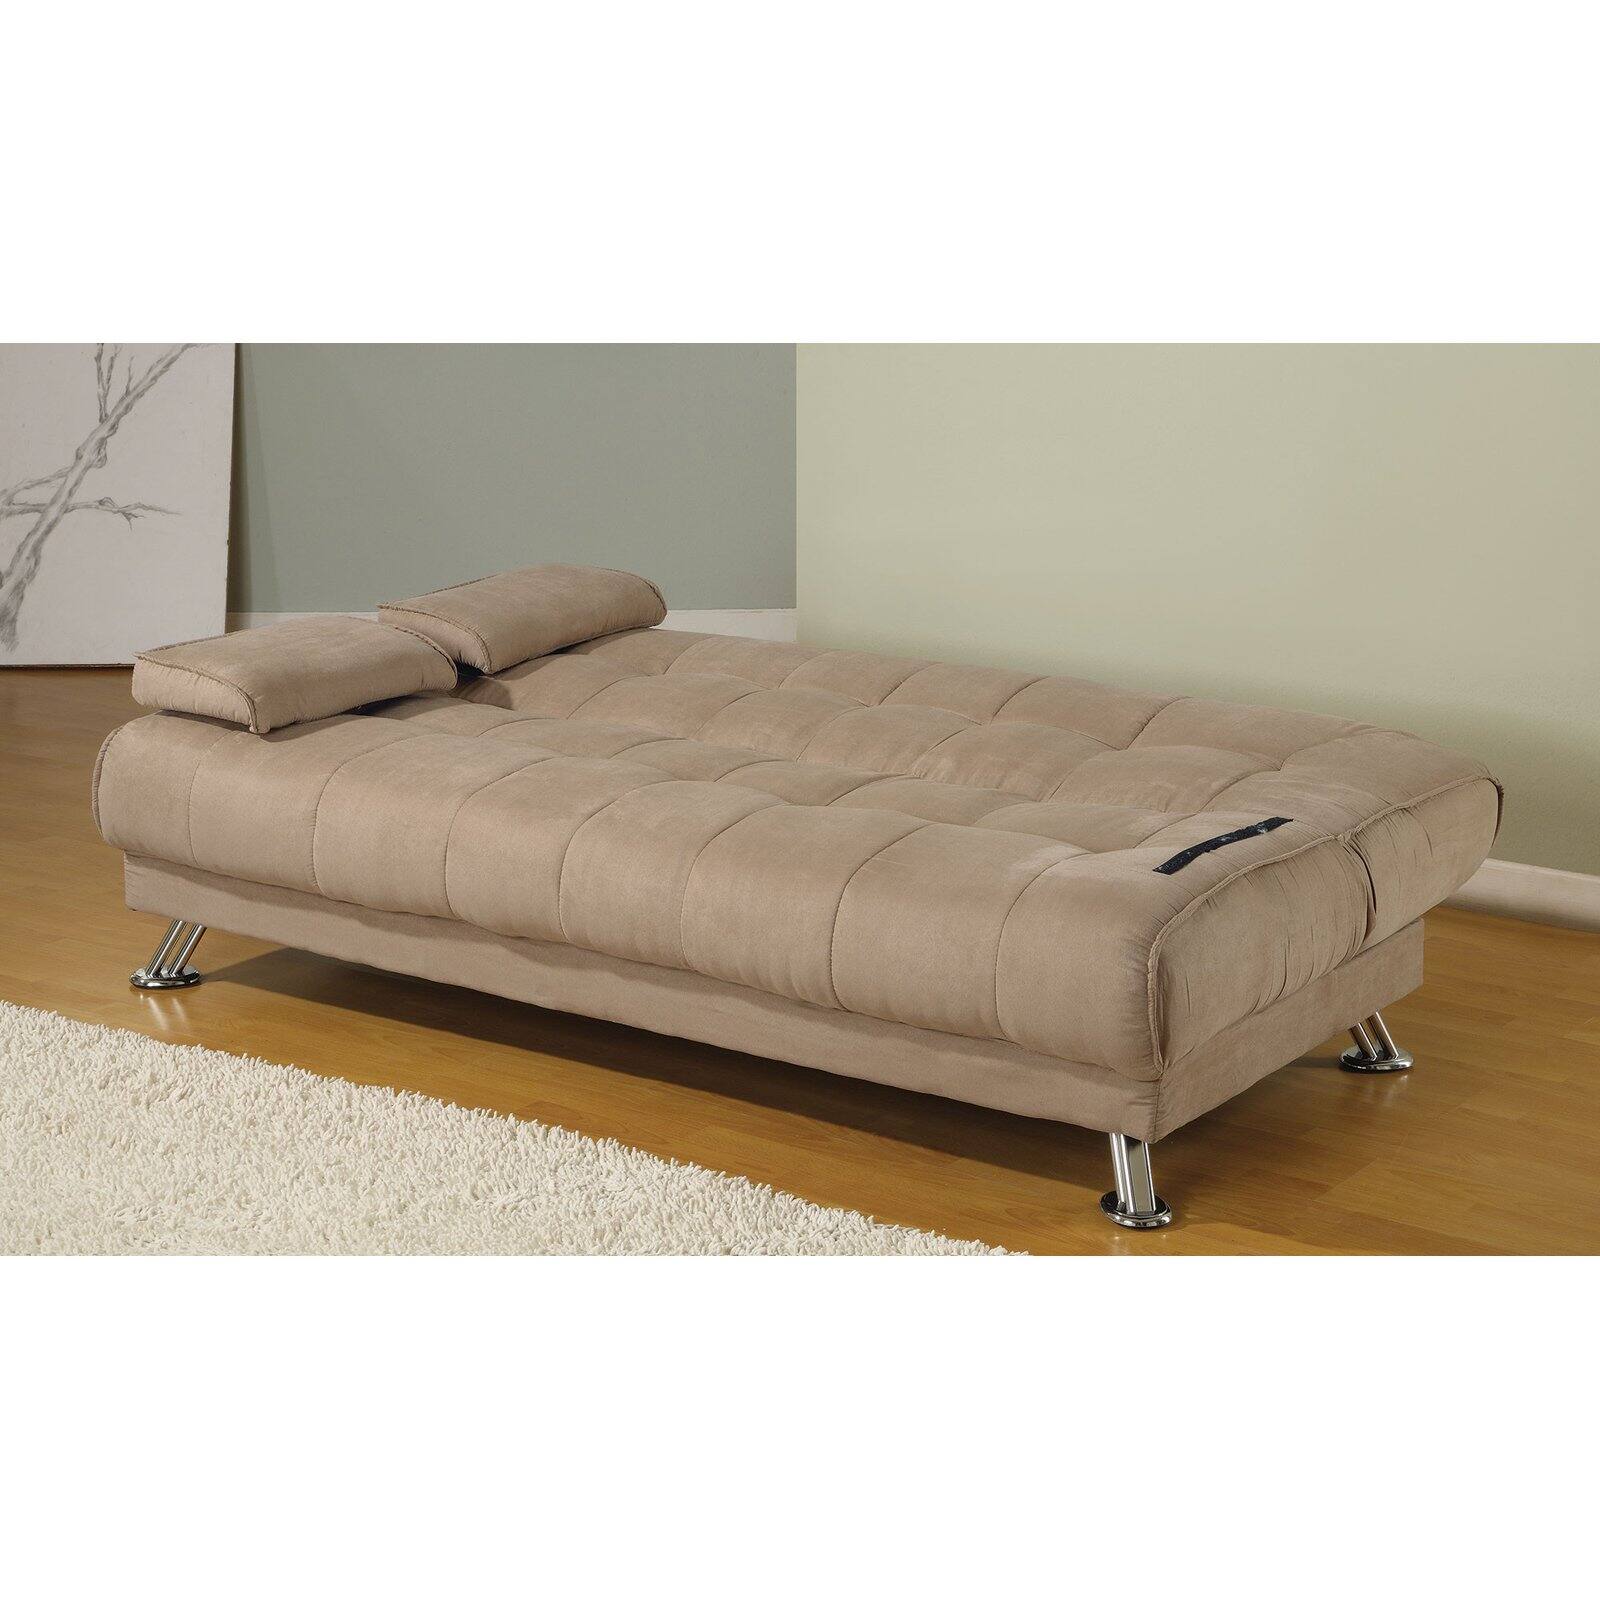 Braxton Leatherette Sofa Bed, Brown - image 4 of 4